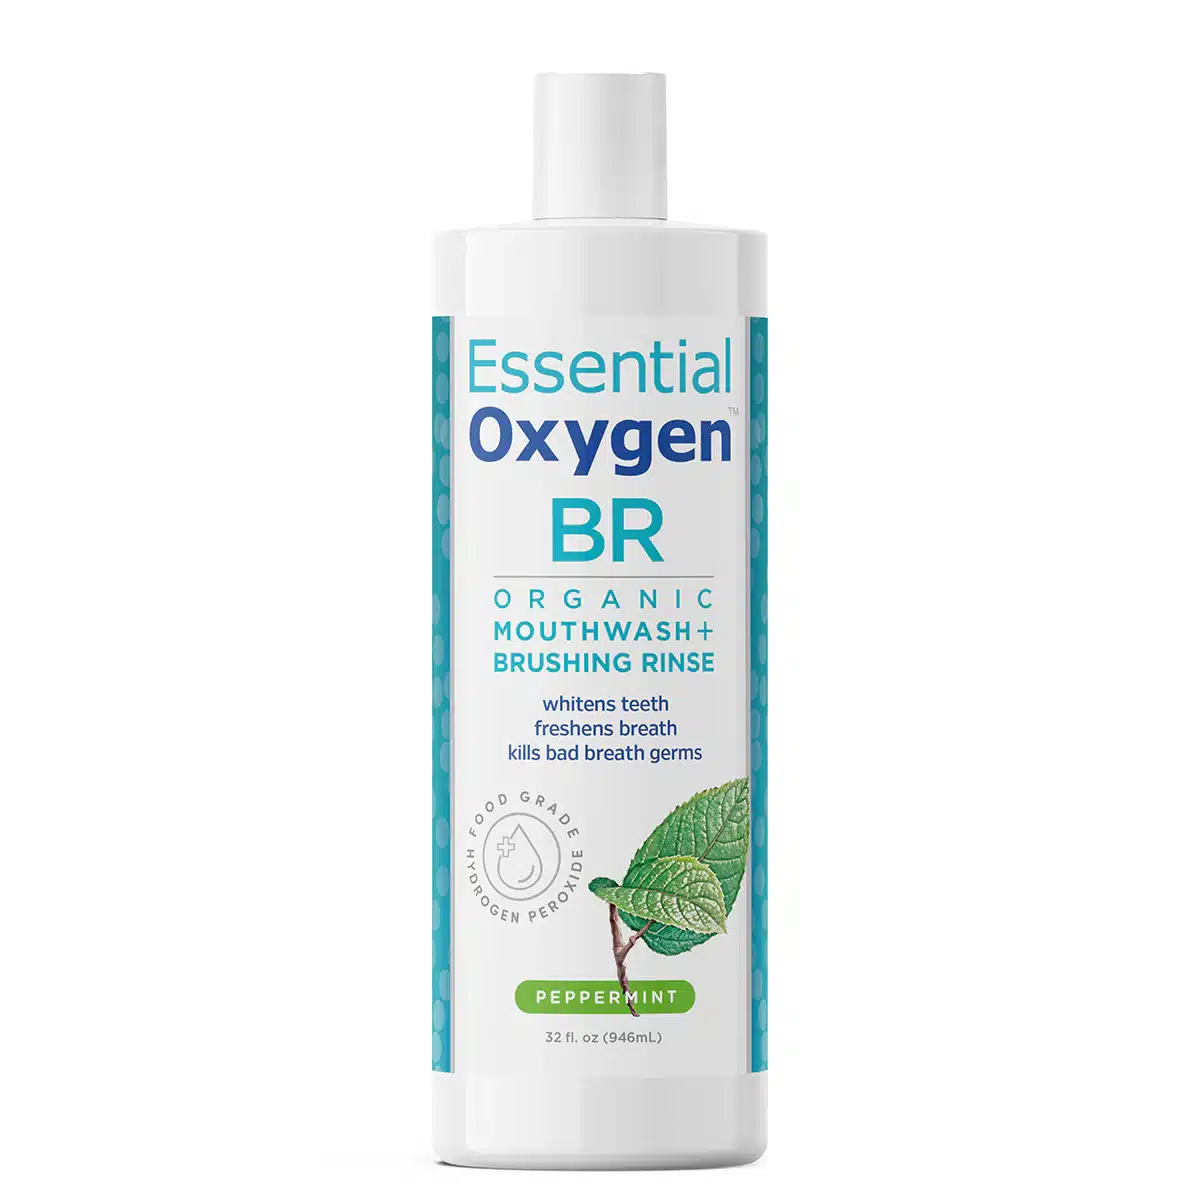 Organic Mouthwash and Brushing Rinse from Essential Oxygen